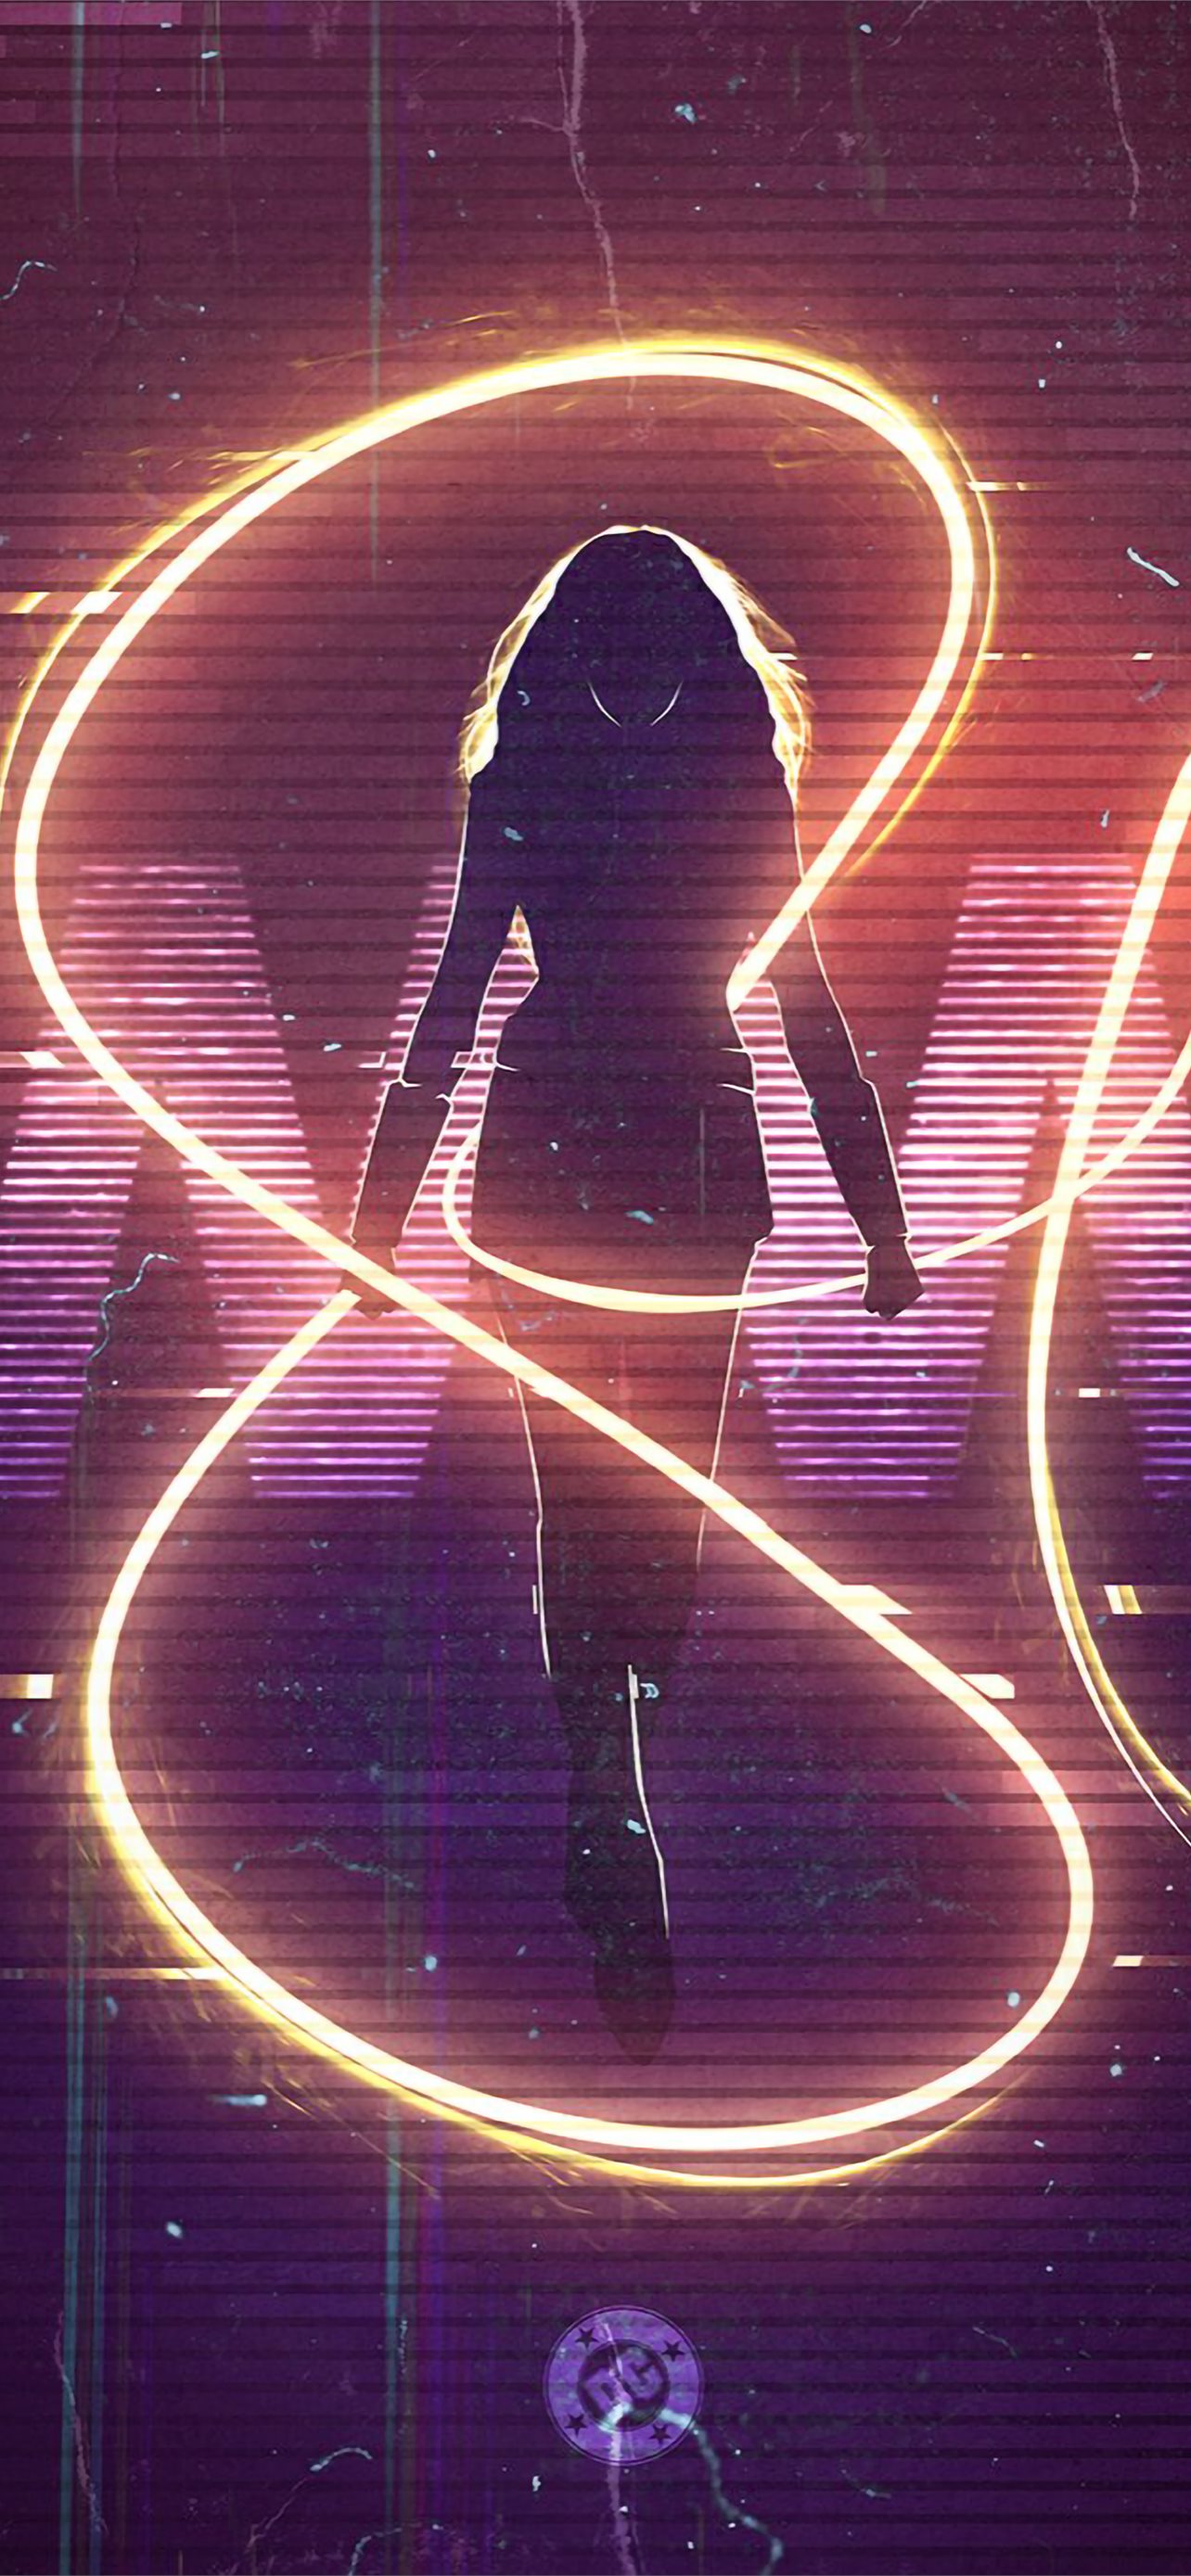 A silhouette of a woman in a black jacket and skirt standing in a neon light - Lightning